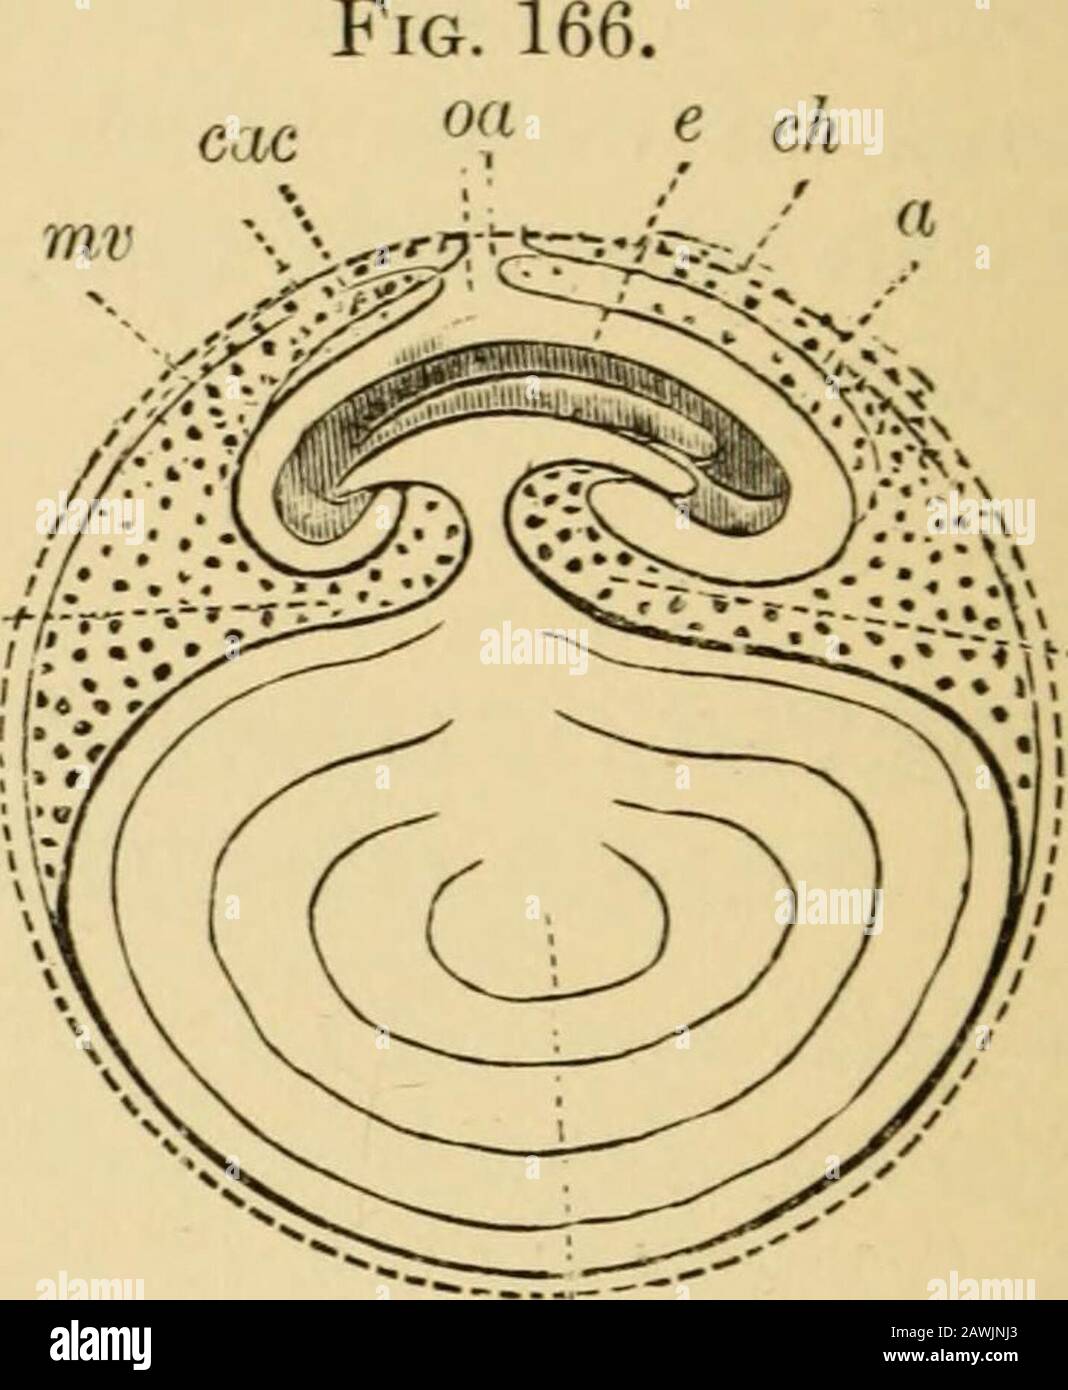 A system of obstetrics .  ea&gt; w PPT&gt;. -PP e, embryo; ec, cephalic extremity; eg, caudalextremity; ca, amniotic hood; pp, pleuro-peritoneal cavity ; y, umbilical vesicle. Fig. 167. e, embryo; a, amnion; oa, amniotic umbilicus;cac, amnio-chorional cavity; pp, pleuro-peritoneal cavity: ch, chorion; mv, vitel-line membrane ; vo, umbilical vesicle. gradually more and more dis-tended by the accumulation offluid until the membrane whichcontains it is pushed out on allsides, uniting in front around theumbilical cord, and coming in con-tact throughout the whole extentof the ovum with the outer Stock Photo